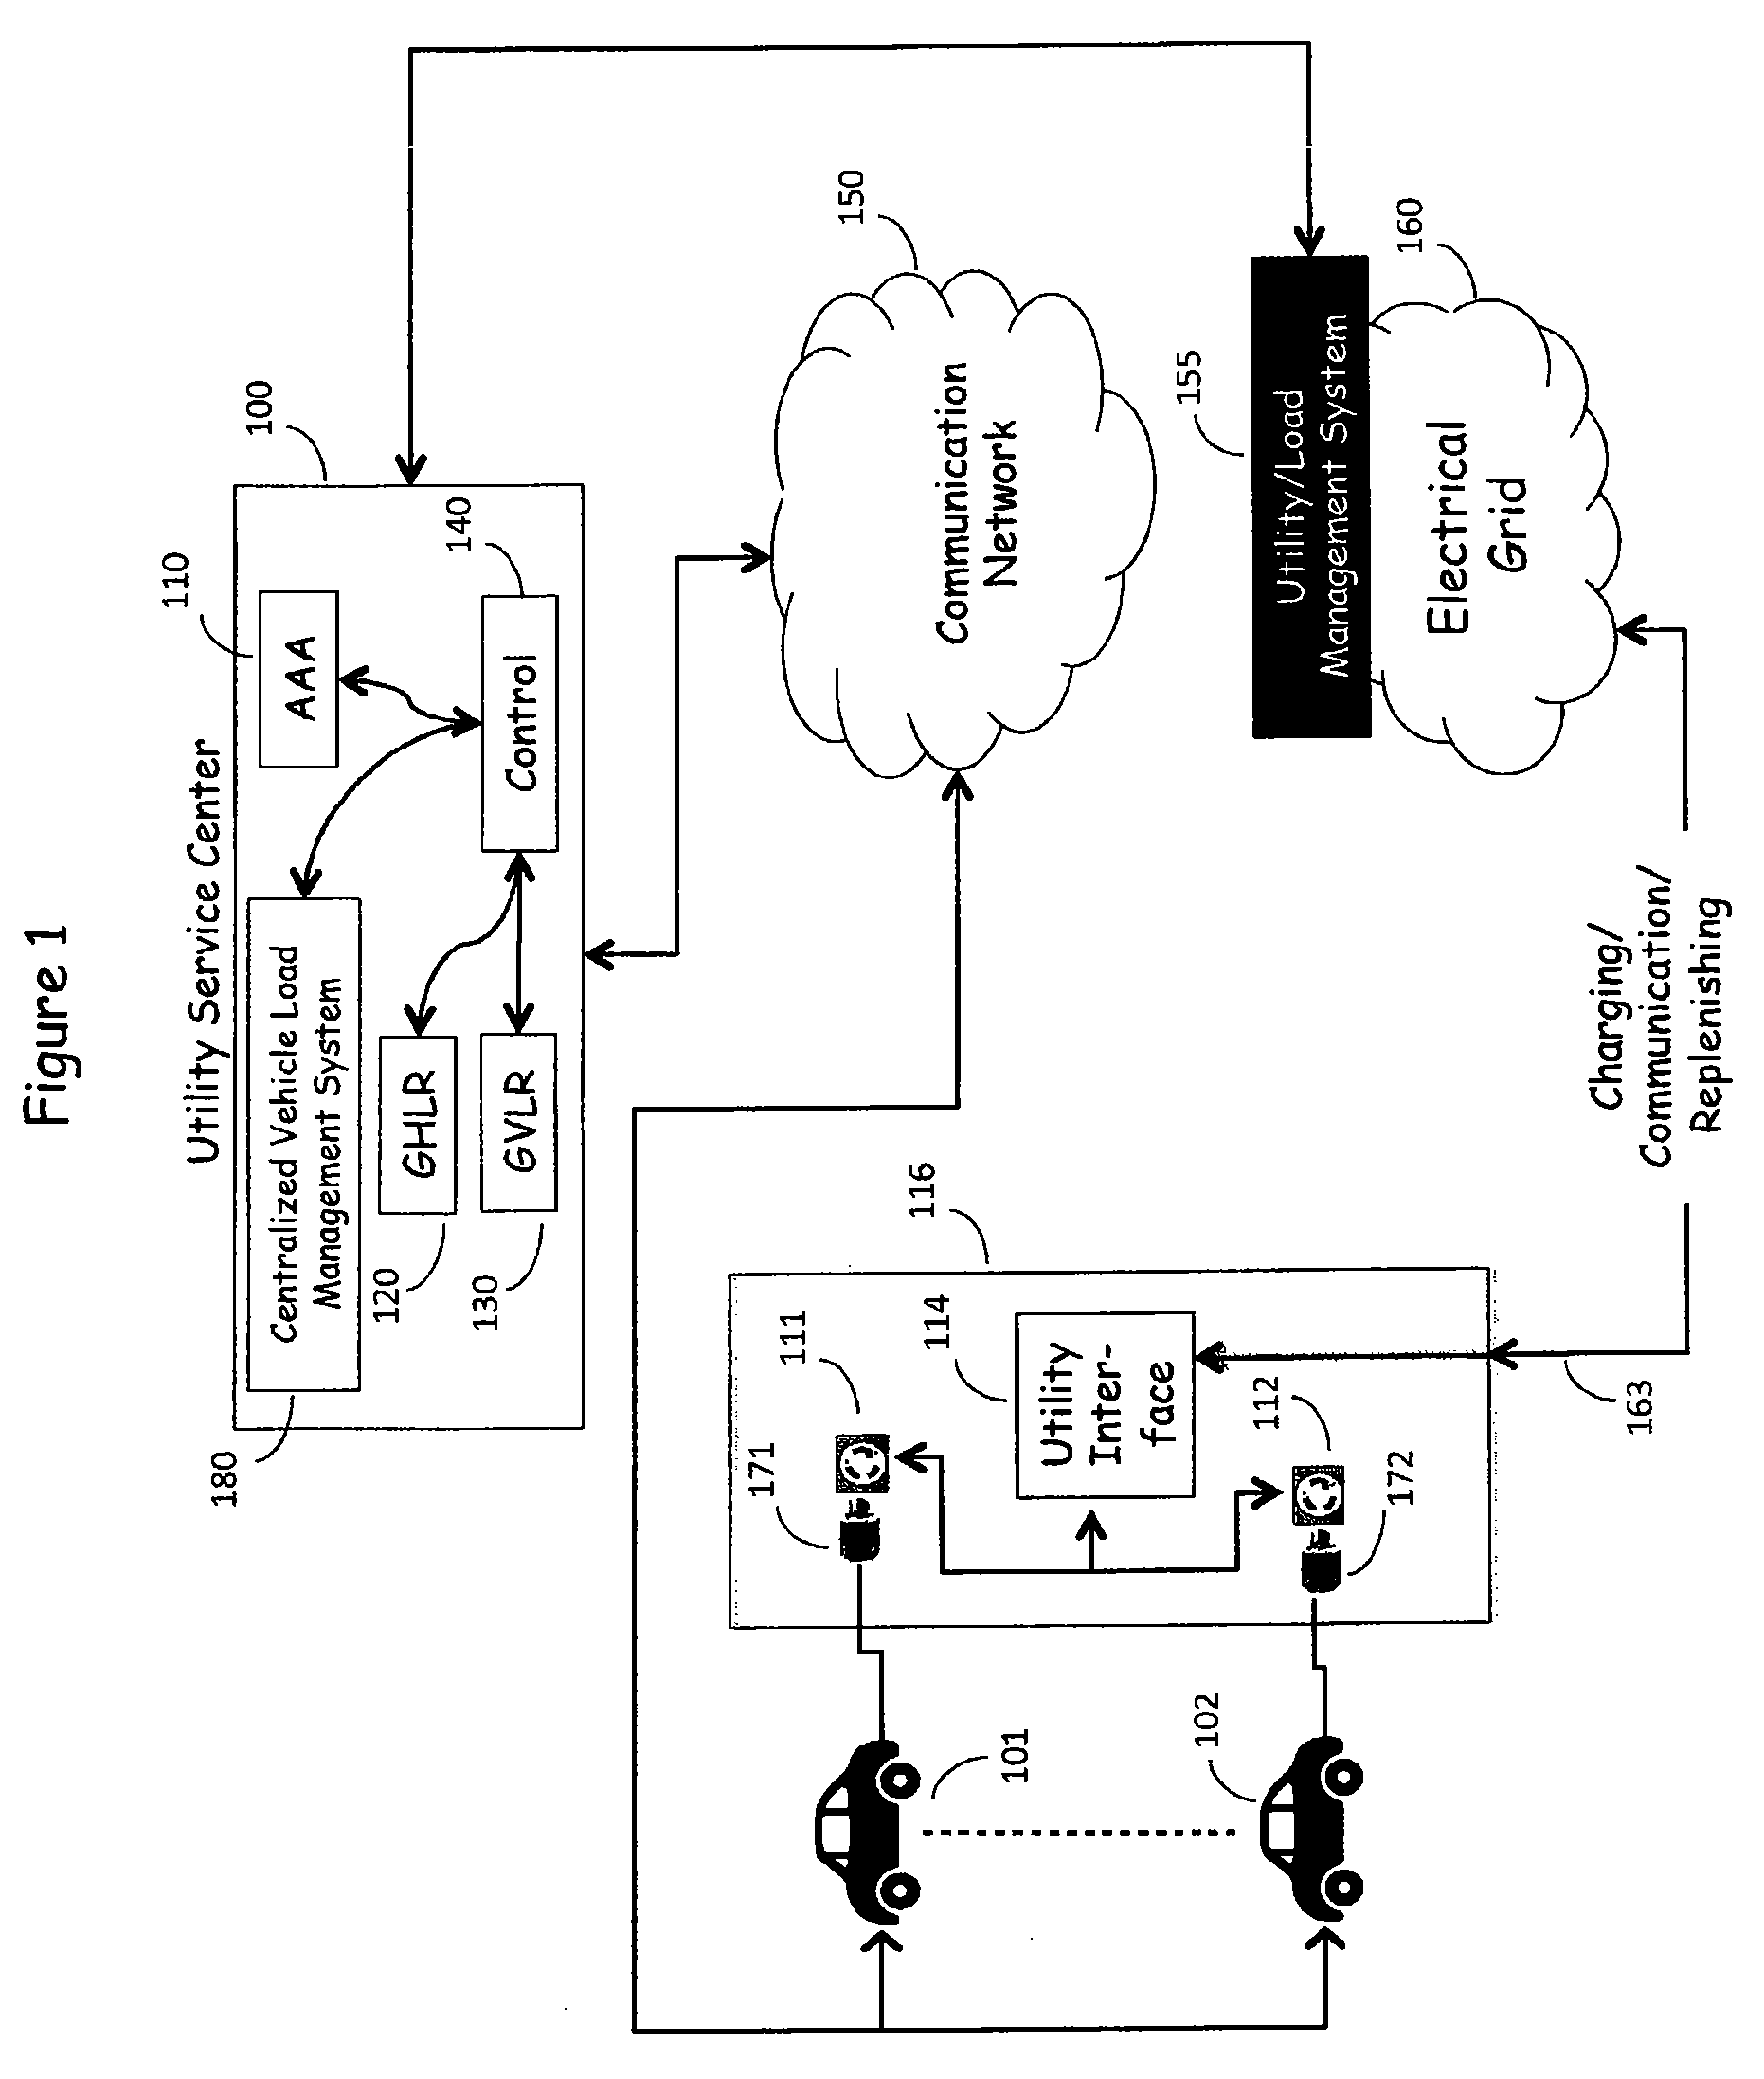 Centralized load management for use in controllably recharging vehicles equipped with electrically powered propulsion systems